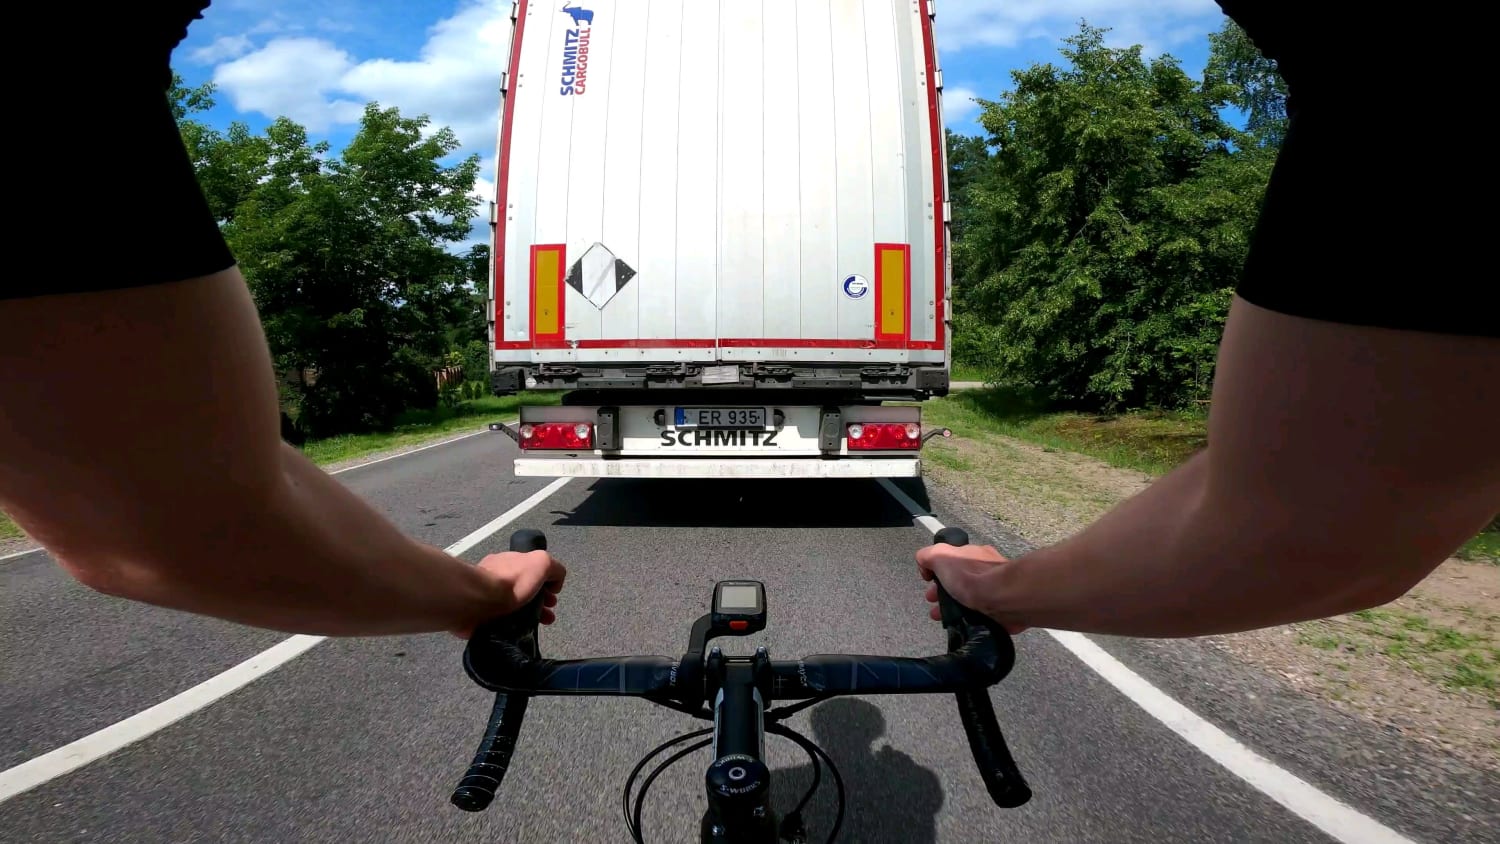 HMRB while I draft this truck at 50mph on a bicycle